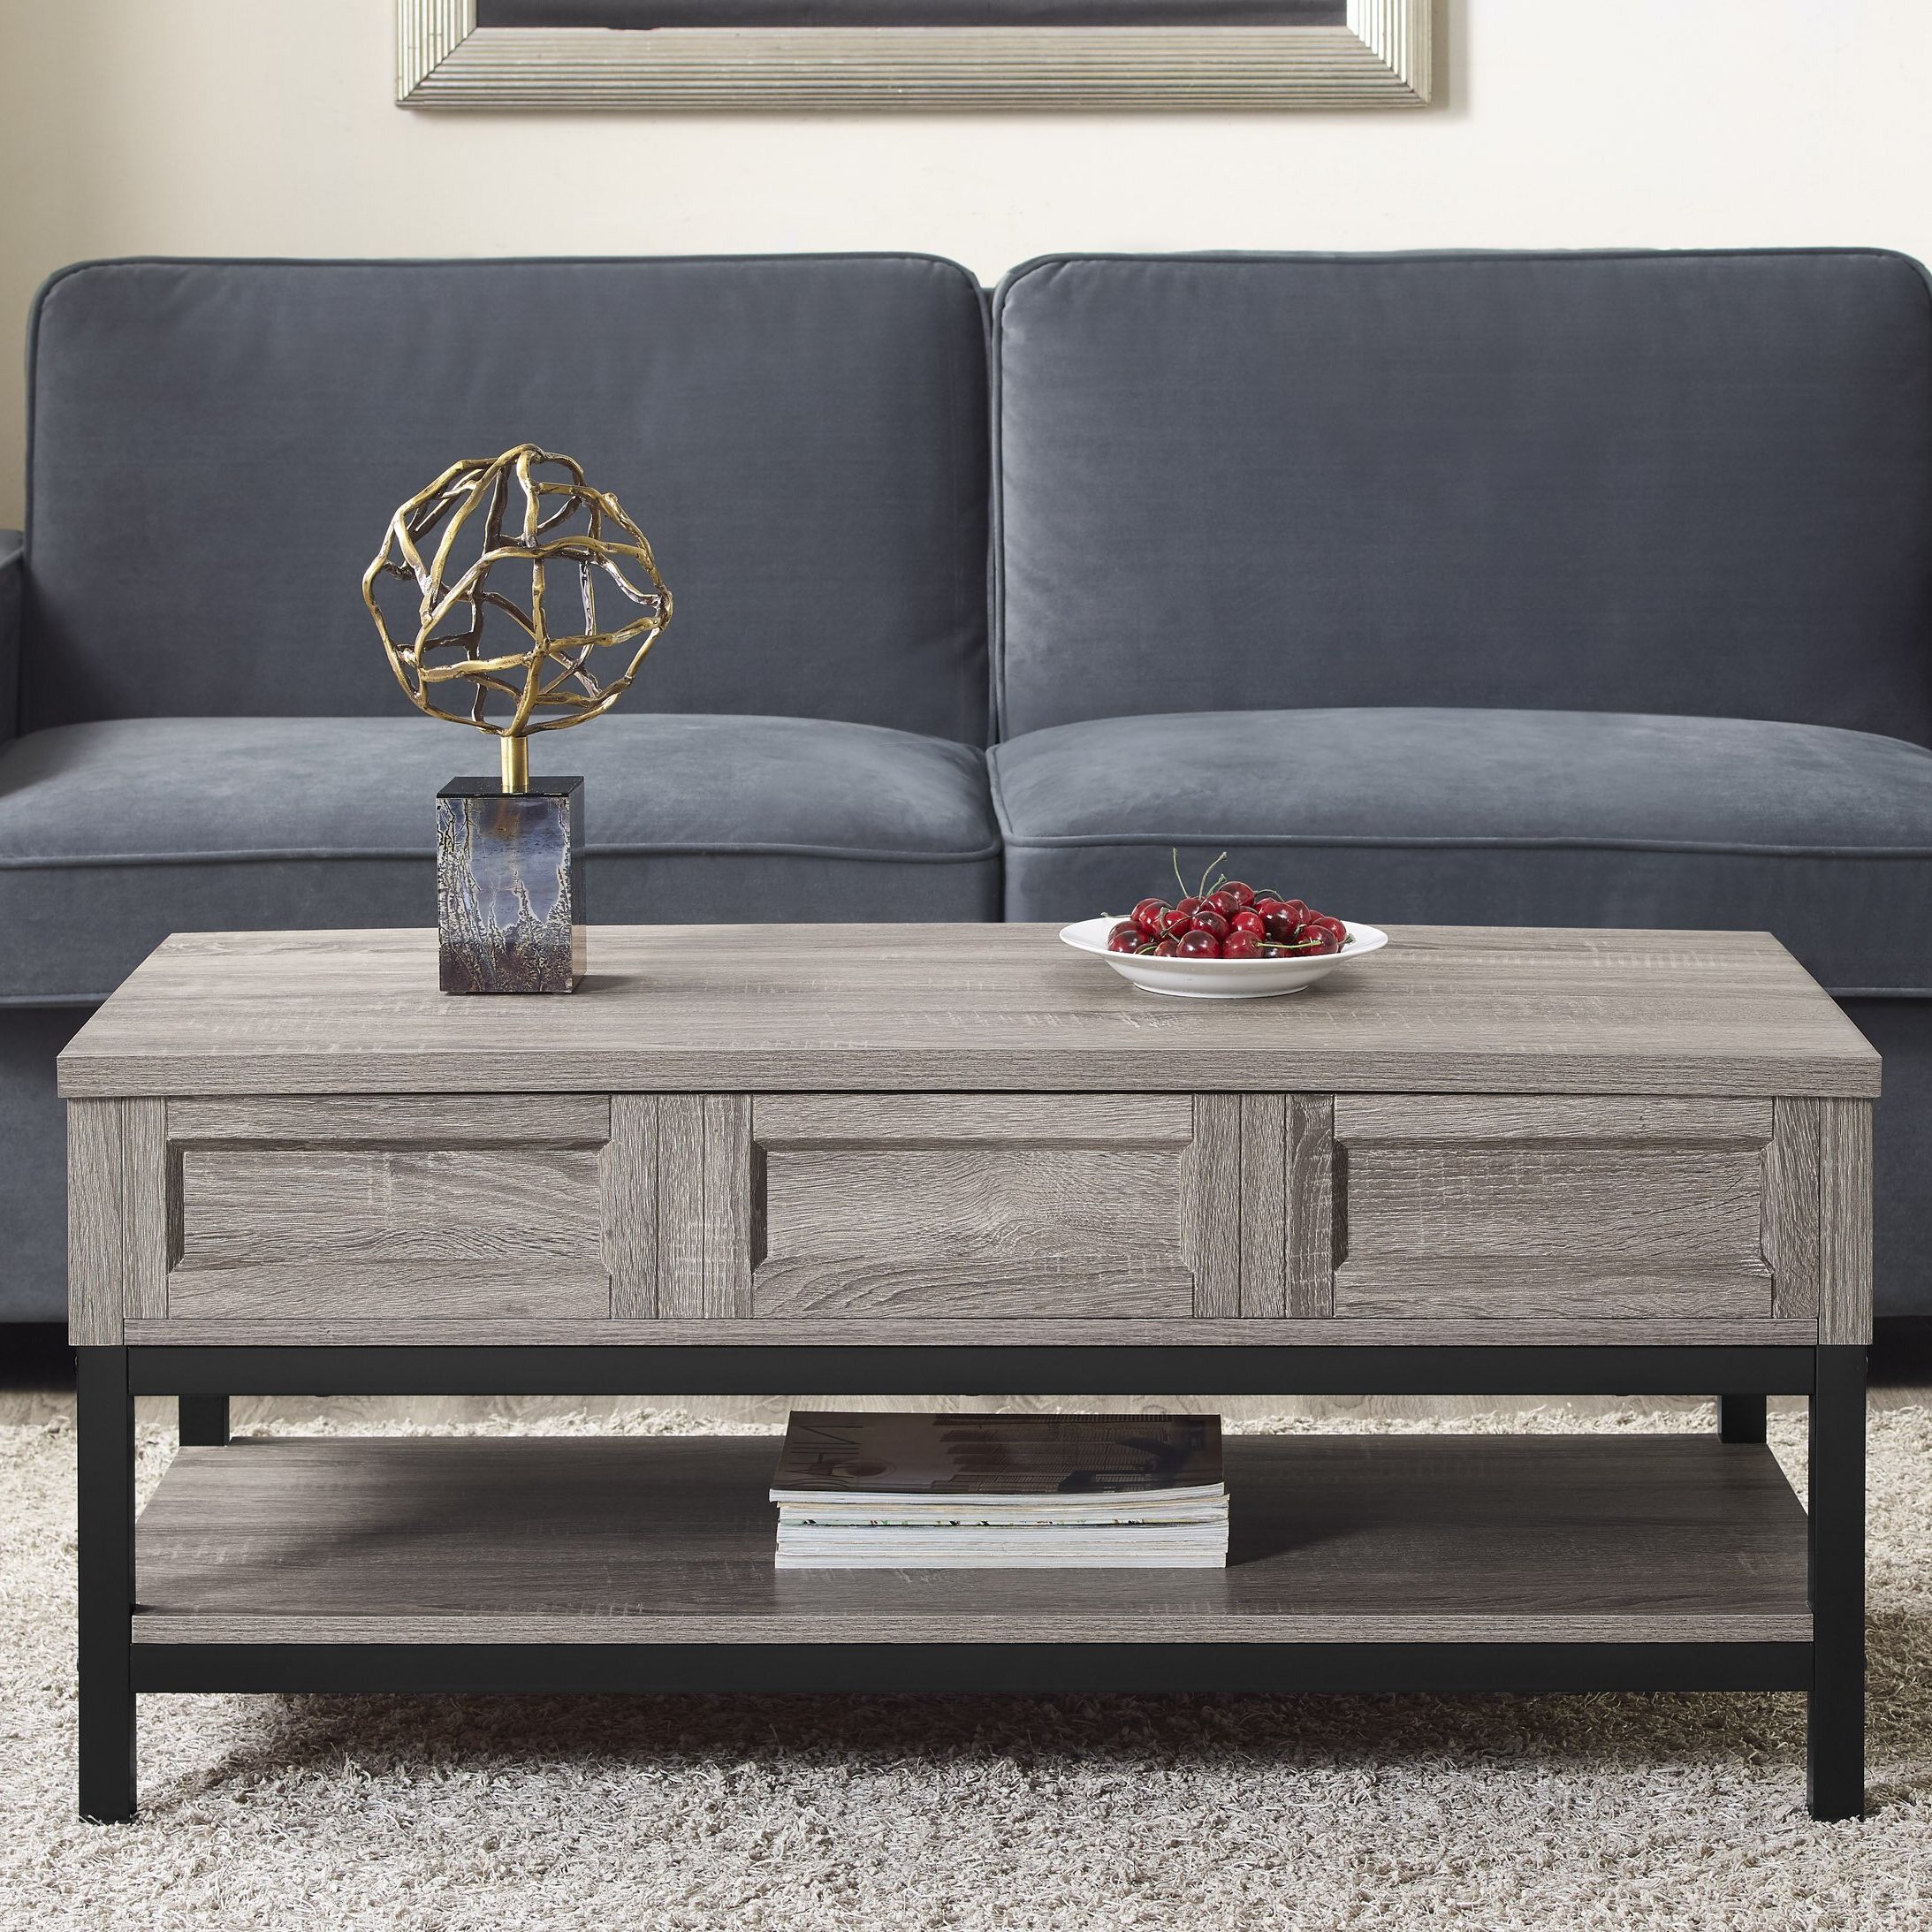 Newest Modern Farmhouse Coffee Table Sets Pertaining To Laurel Foundry Modern Farmhouse Omar Coffee Table With Lift Top (View 13 of 15)